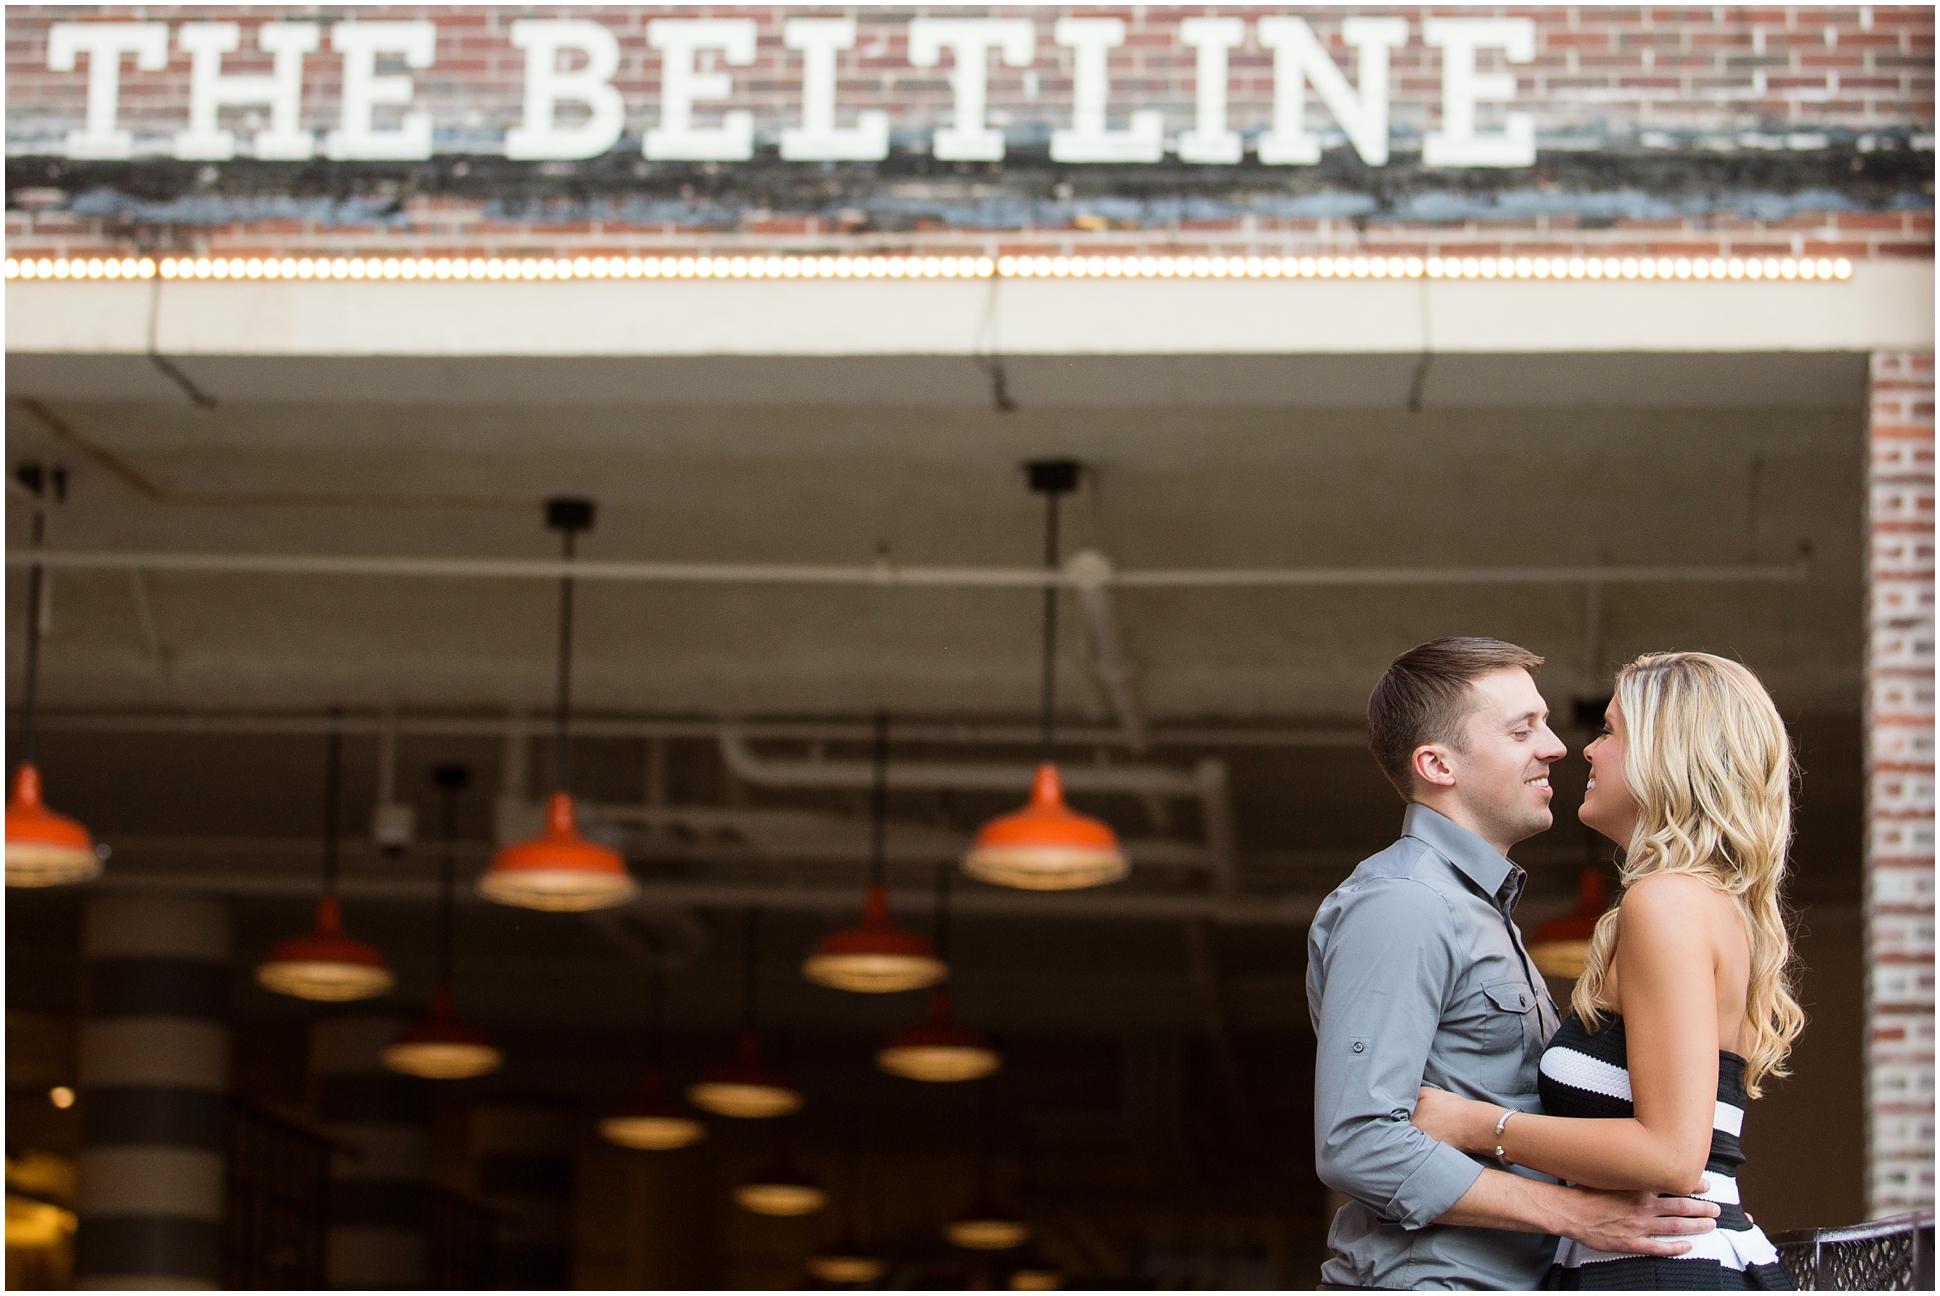 Ponce City Market and Atlanta Beltline Engagement Session | Two Chics Photography | www.twochicsphotography.com